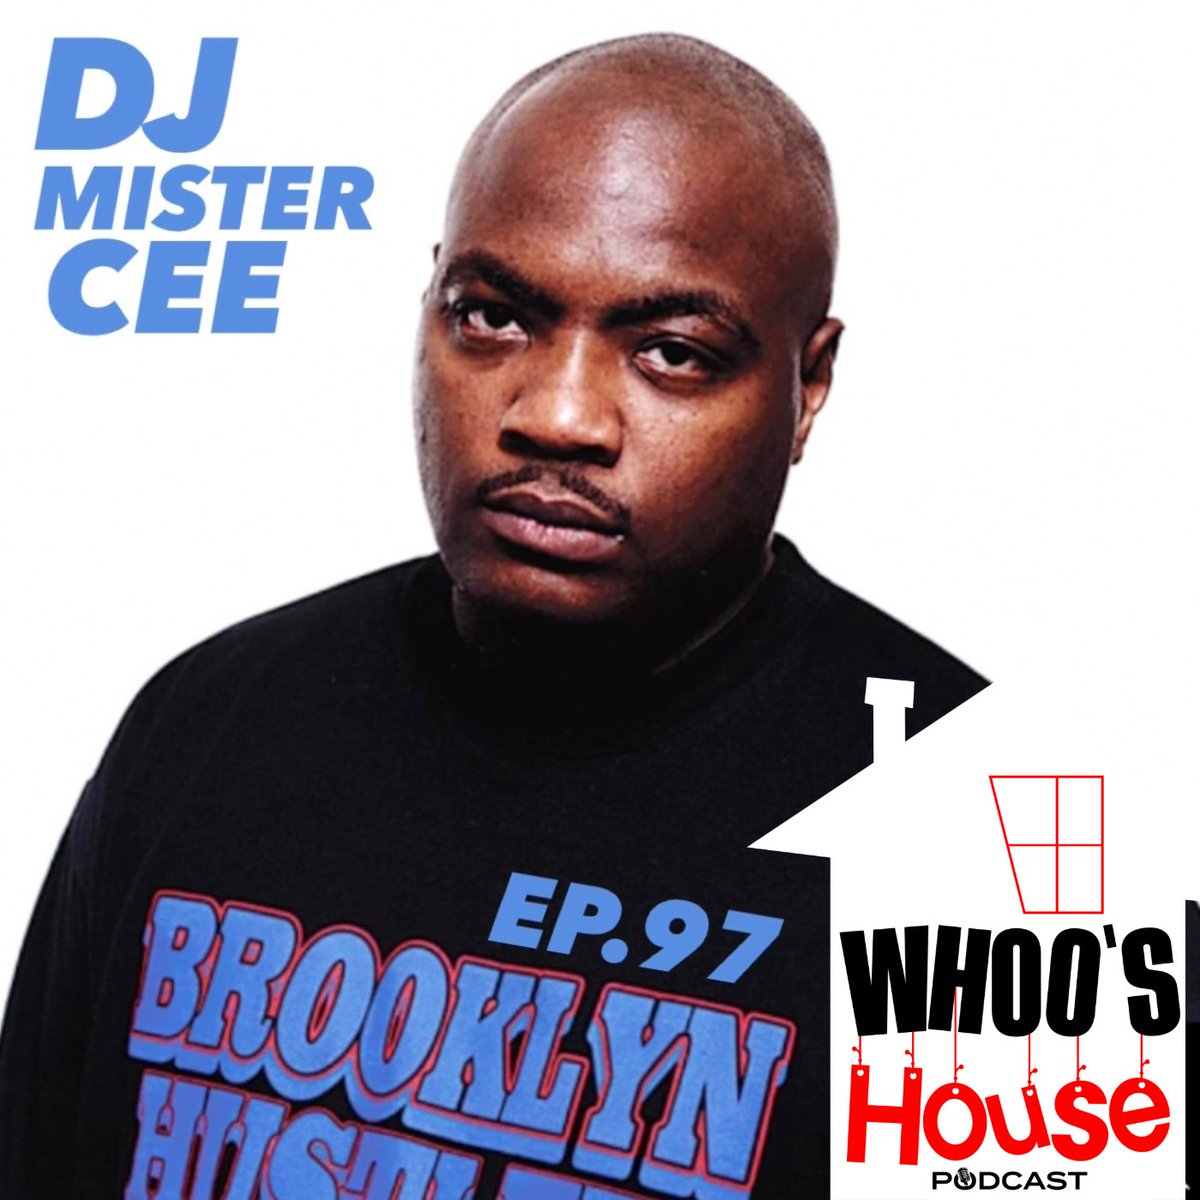 RIP DJ Mister CEE and ASap Ferg talk about the origins of the Notorious BIG on WHOO's House with DJ WHOO Kid. 🎧WHOOsHouse.lnk.to/DJMisterCee @DJWHOOKid @djmistercee #RIPDjmisterCee #DJMisterCee #podcast #listennow #BadBoys